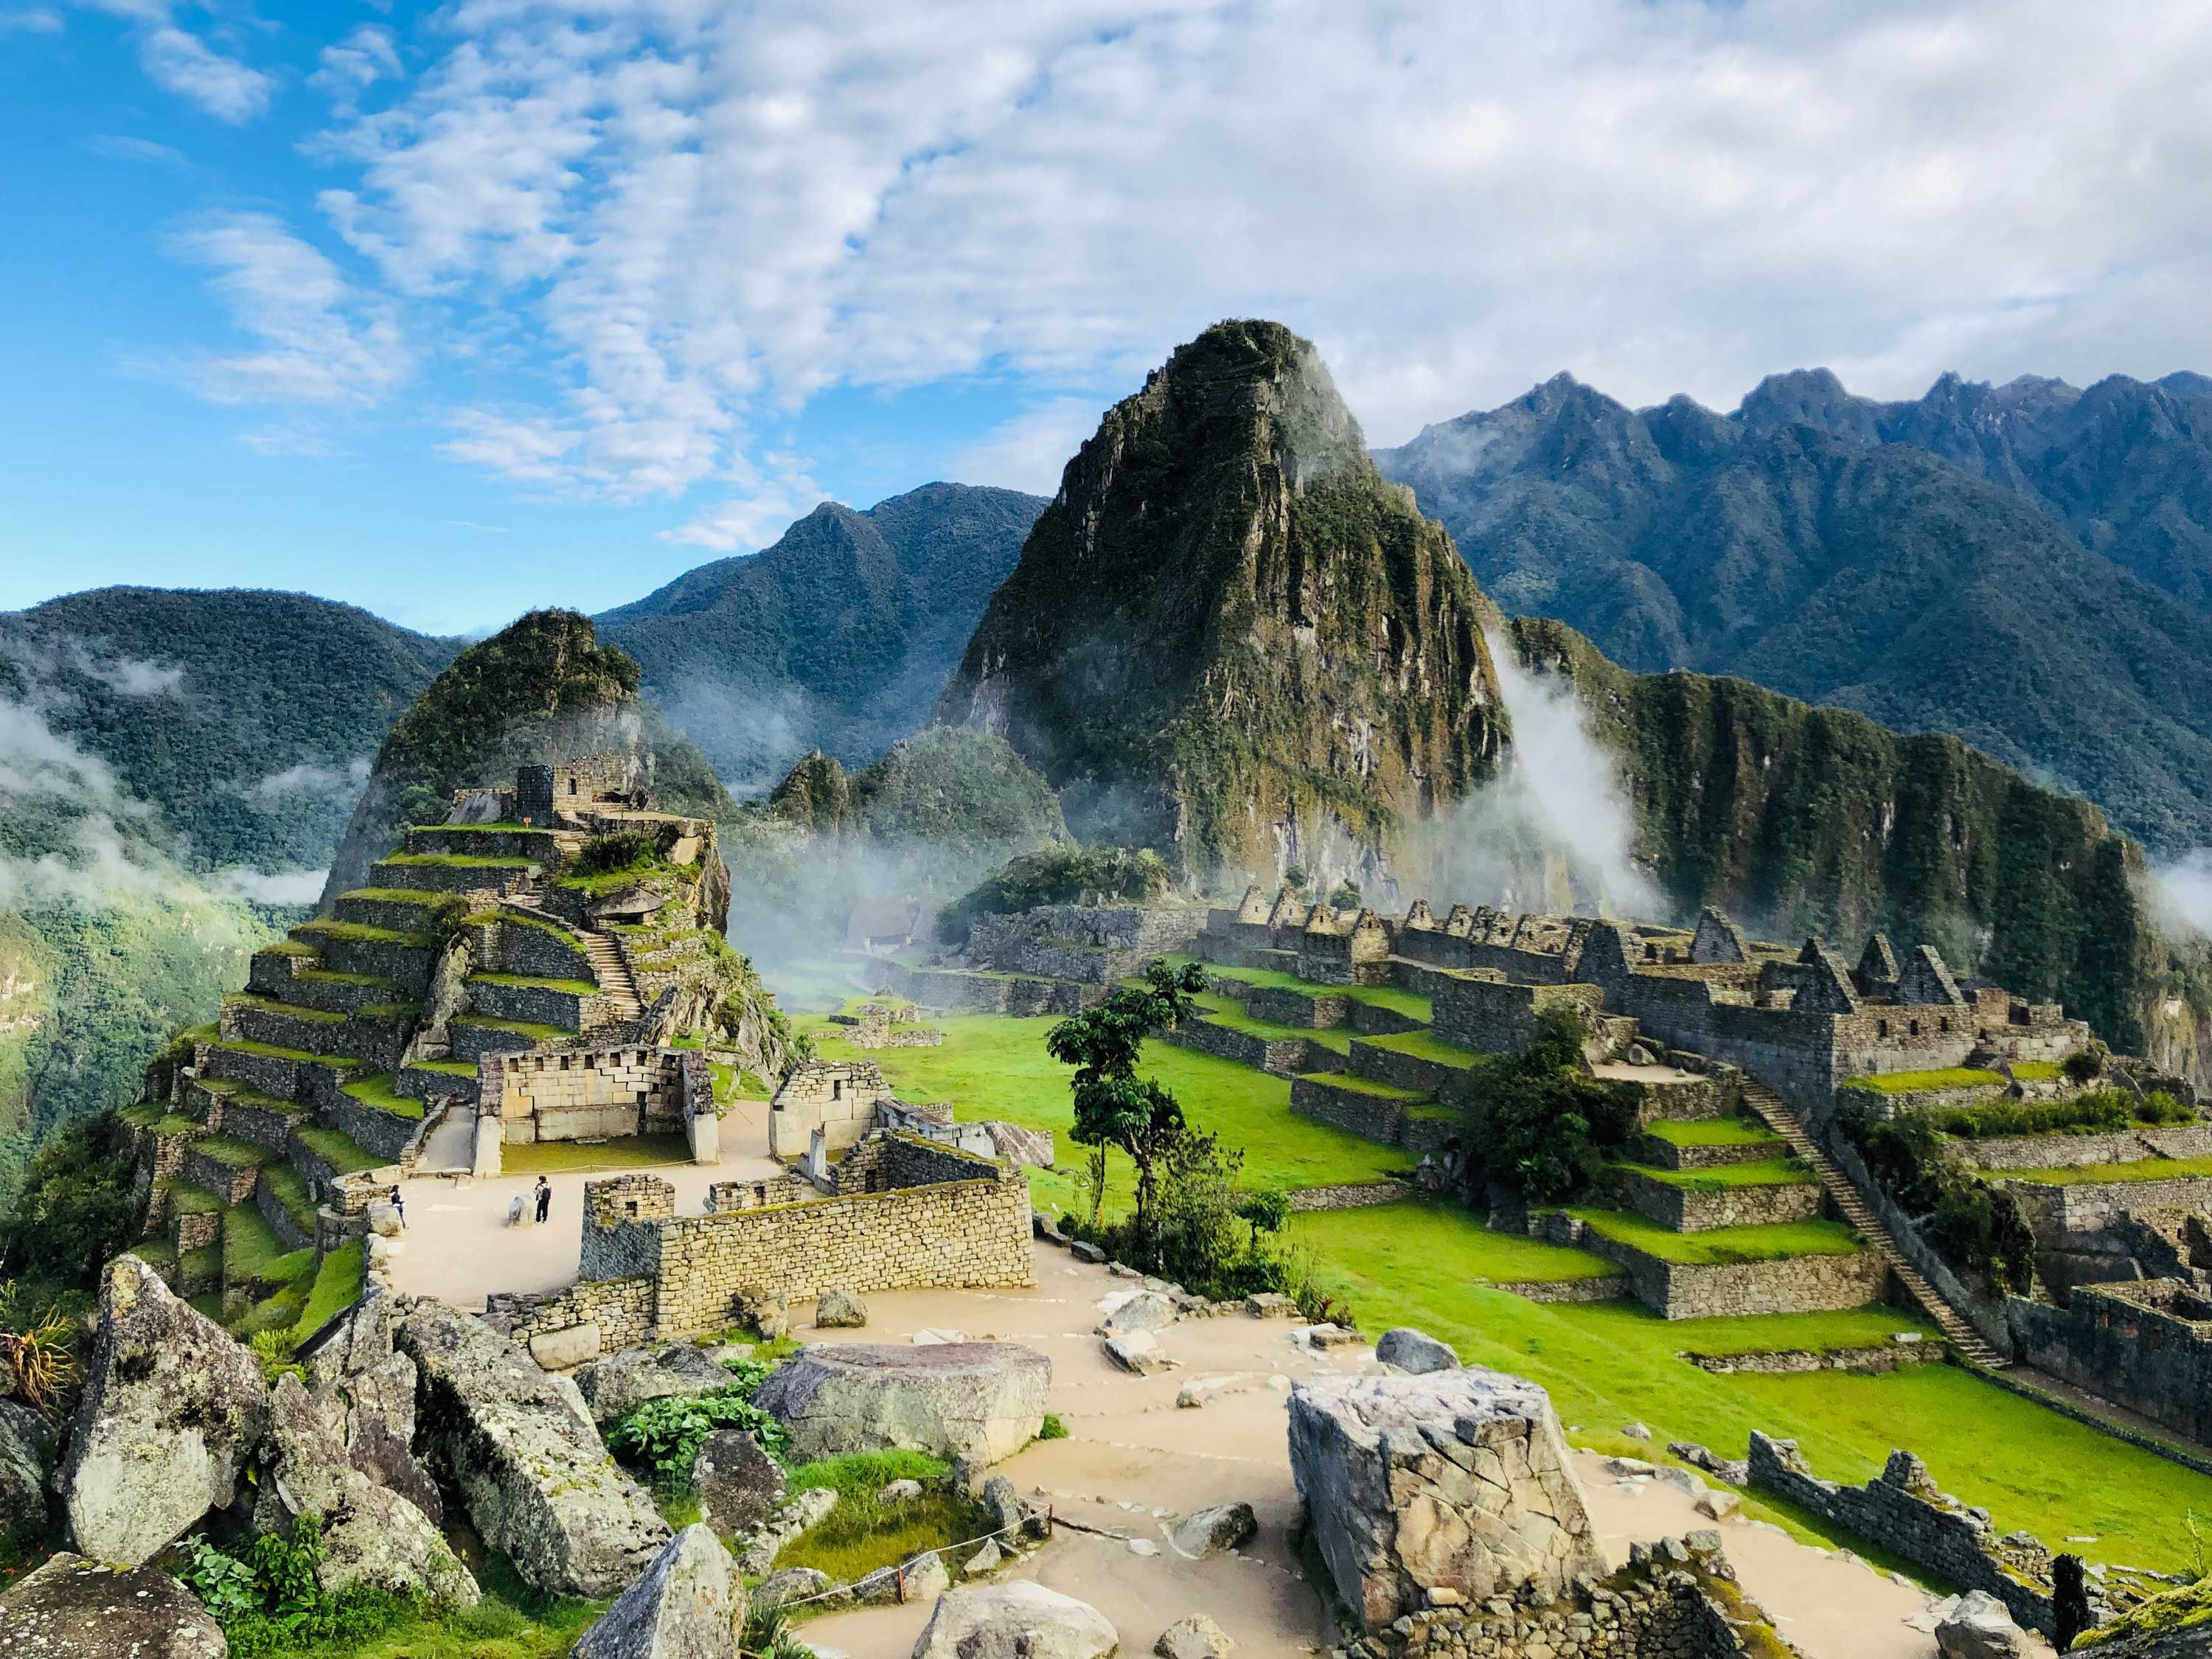 The Inca citadel of Machu Picchu in the early morning light with Huayna Picchu mountain in the background.